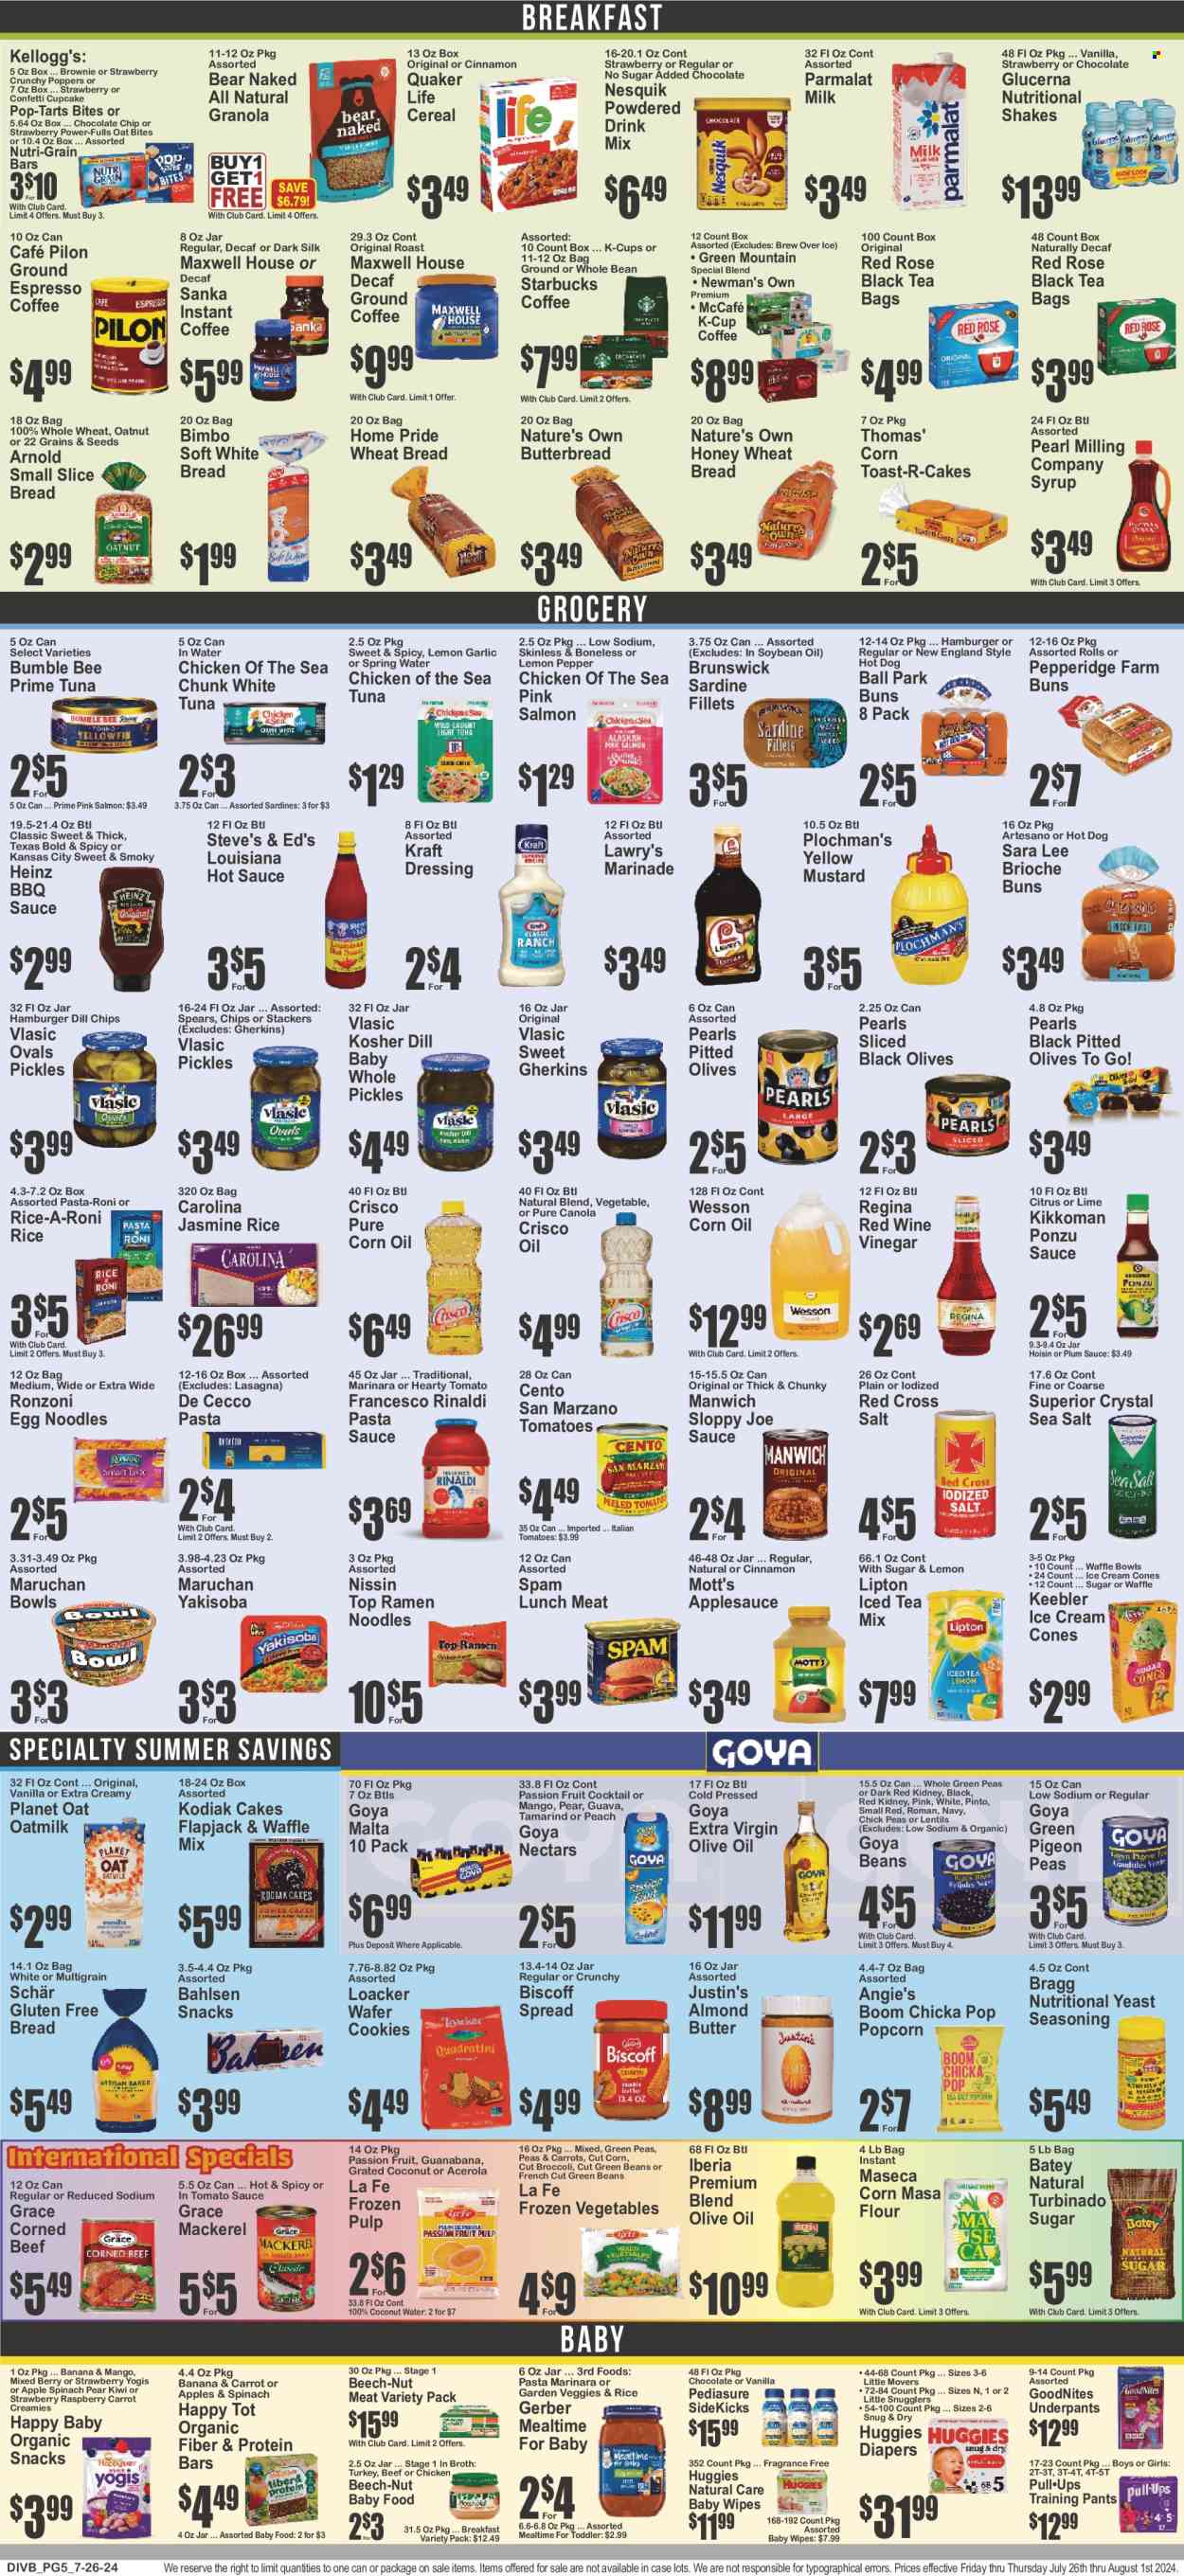 thumbnail - Super Fresh Flyer - 07/26/2024 - 08/01/2024 - Sales products - bread, wheat bread, cake, buns, Sara Lee, cupcake, broccoli, carrots, green beans, kiwi, Mott's, passion fruit, mackerel, sardines, tuna, ramen, hot dog, pasta sauce, snack, hamburger, Bumble Bee, Top Ramen, Quaker, noodles, lasagna meal, pasta sides, Kraft®, Nissin, spaghetti sauce, ready meal, rice sides, Spam, lunch meat, corned beef, Nesquik, Parmalat, snack bar, shake, oat milk, probiotic drink, almond butter, ice cones, frozen vegetables, cereal bar, Kellogg's, Pop-Tarts, Keebler, waffle cones, Gerber, popcorn, Crisco, flour, broth, tamarind, canned tuna, lentils, Heinz, pickles, Chicken of the Sea, Goya, Manwich, pickled gherkins, canned fish, pickled vegetables, cereals, granola, protein bar, Nutri-Grain, oat bites, soybeans, chickpeas, jasmine rice, egg noodles, toor dal, spice, seasoning, BBQ sauce, mustard, hoisin sauce, hot sauce, Kikkoman, marinade, corn oil, extra virgin olive oil, soya oil, wine vinegar, olive oil, apple sauce, Lipton, coconut water, spring water, powder drink, Maxwell House, tea bags, Starbucks, instant coffee, ground coffee, coffee capsules, McCafe, K-Cups, Green Mountain, baby food pouch, wipes, Huggies, pants, baby wipes, nappies, baby pants, underpants. Page 5.